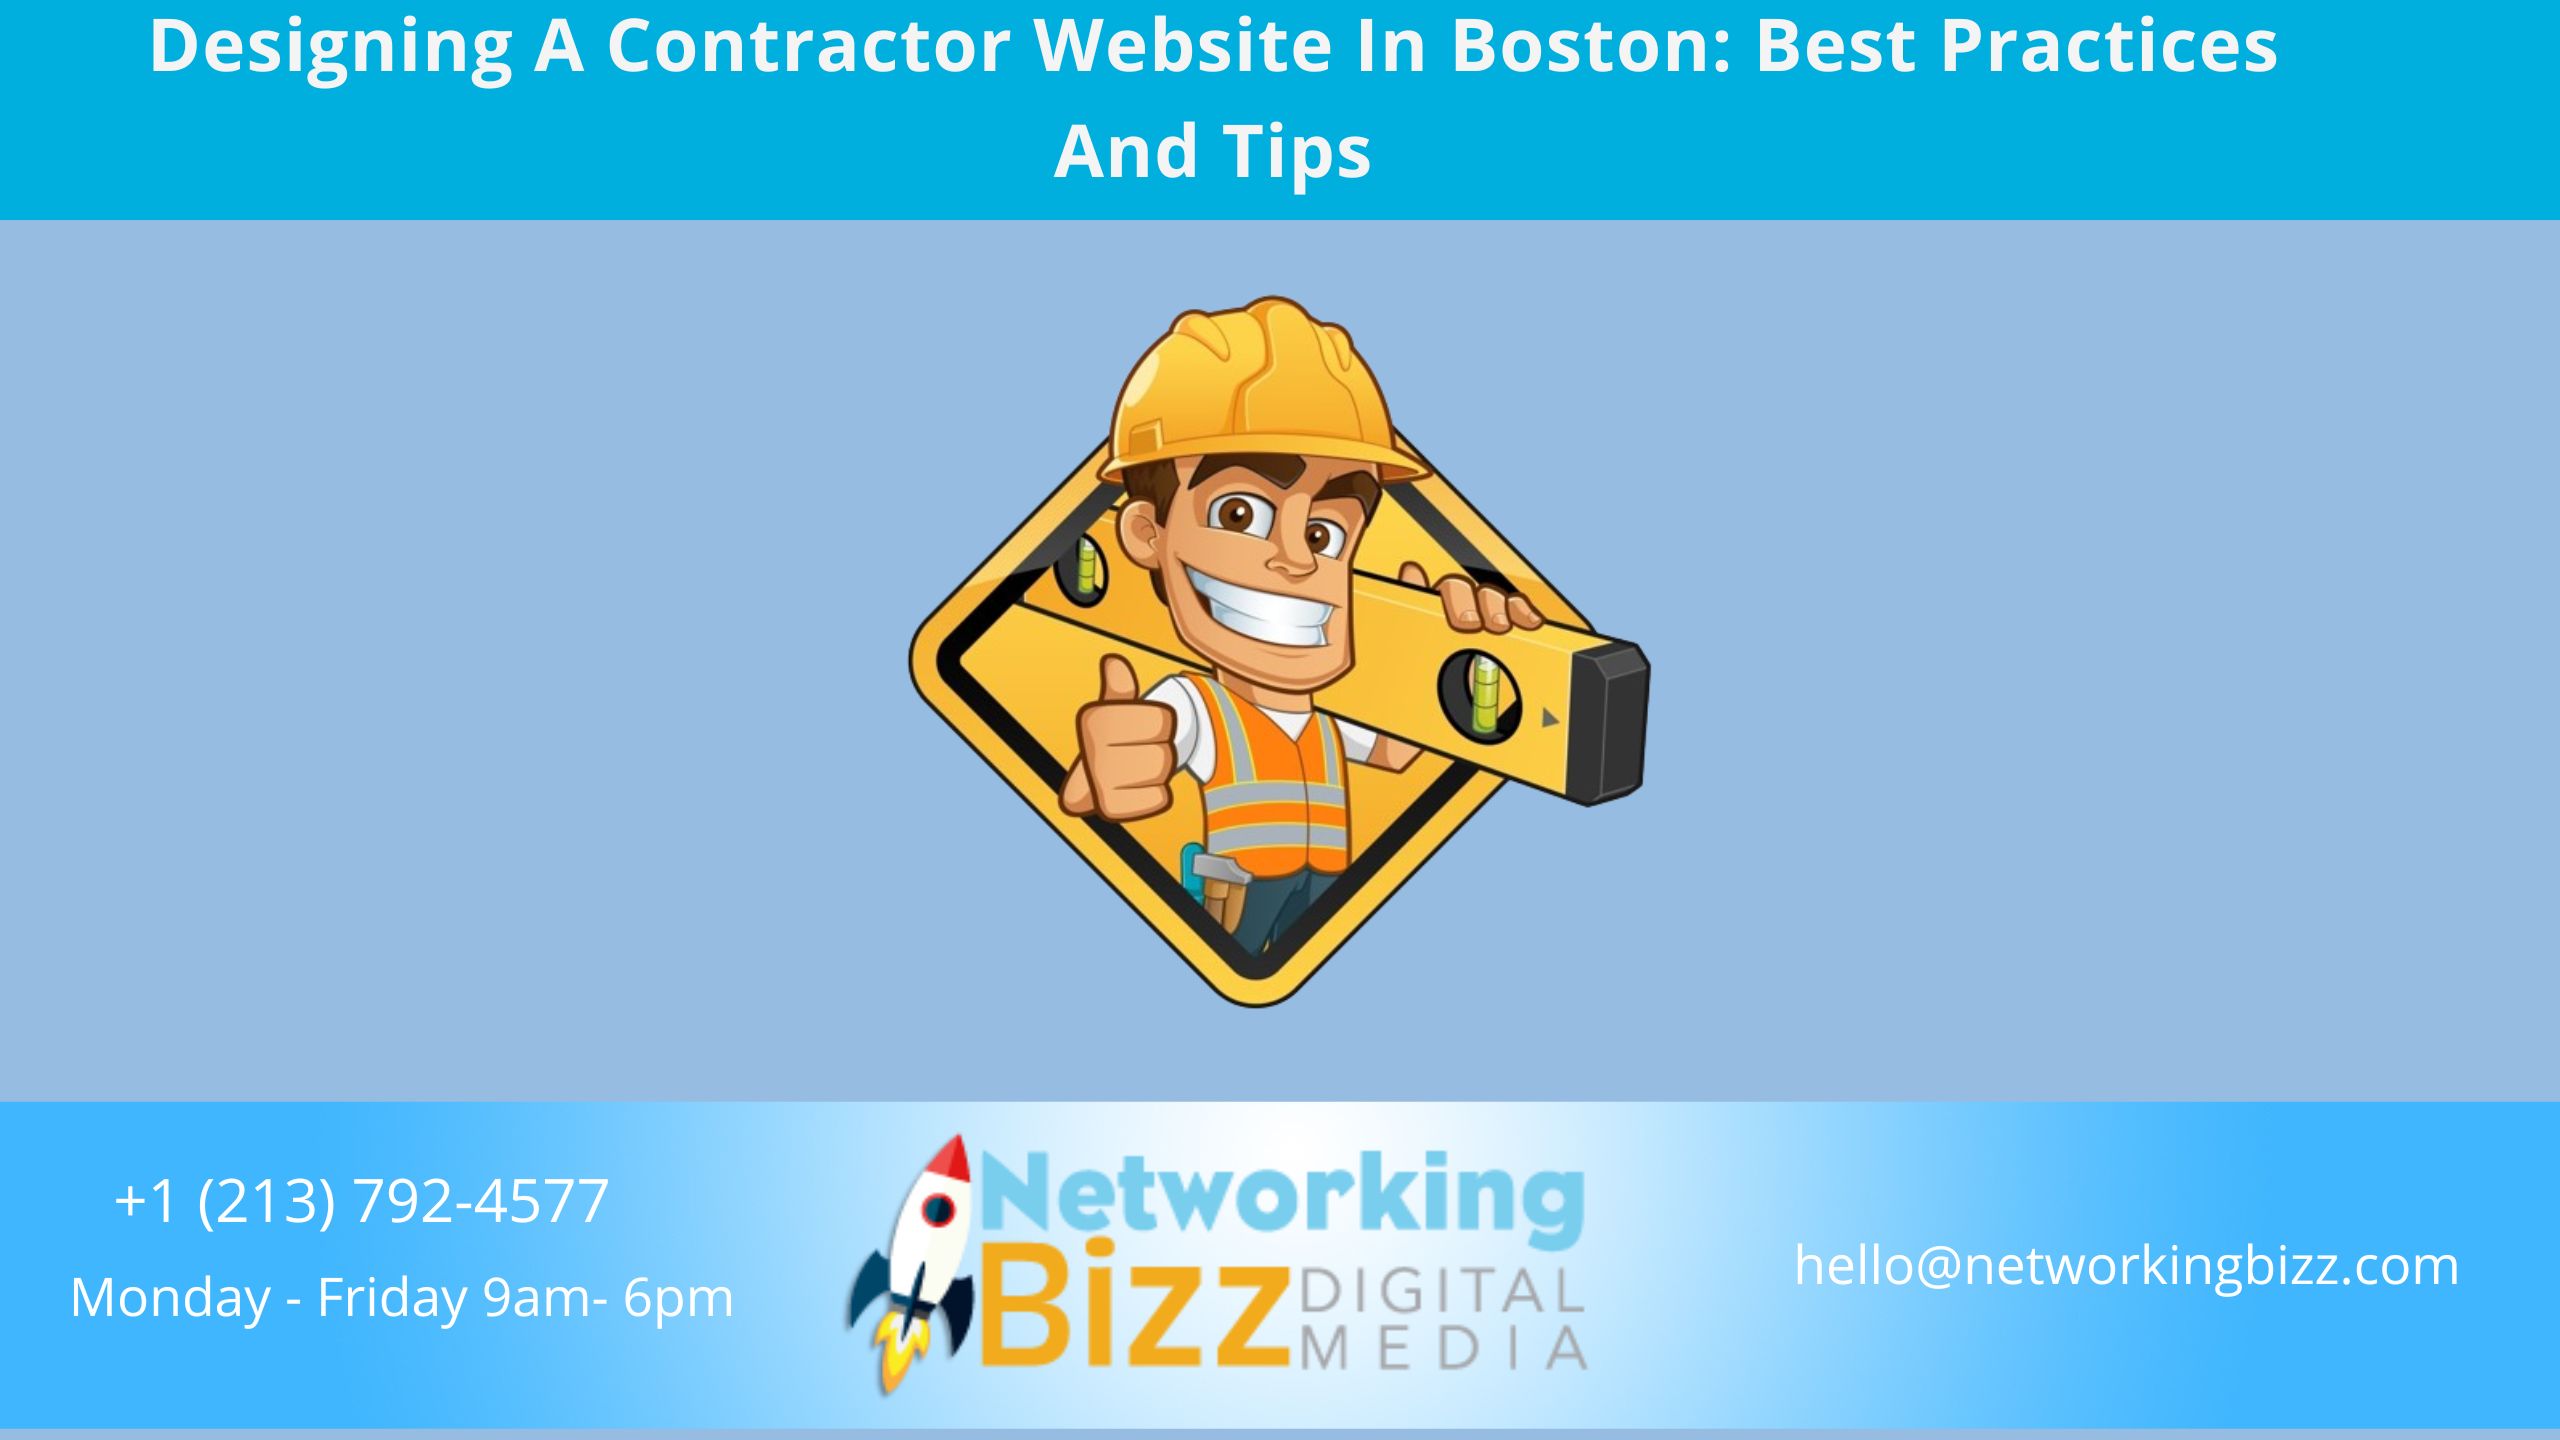 Designing A Contractor Website In Boston: Best Practices And Tips